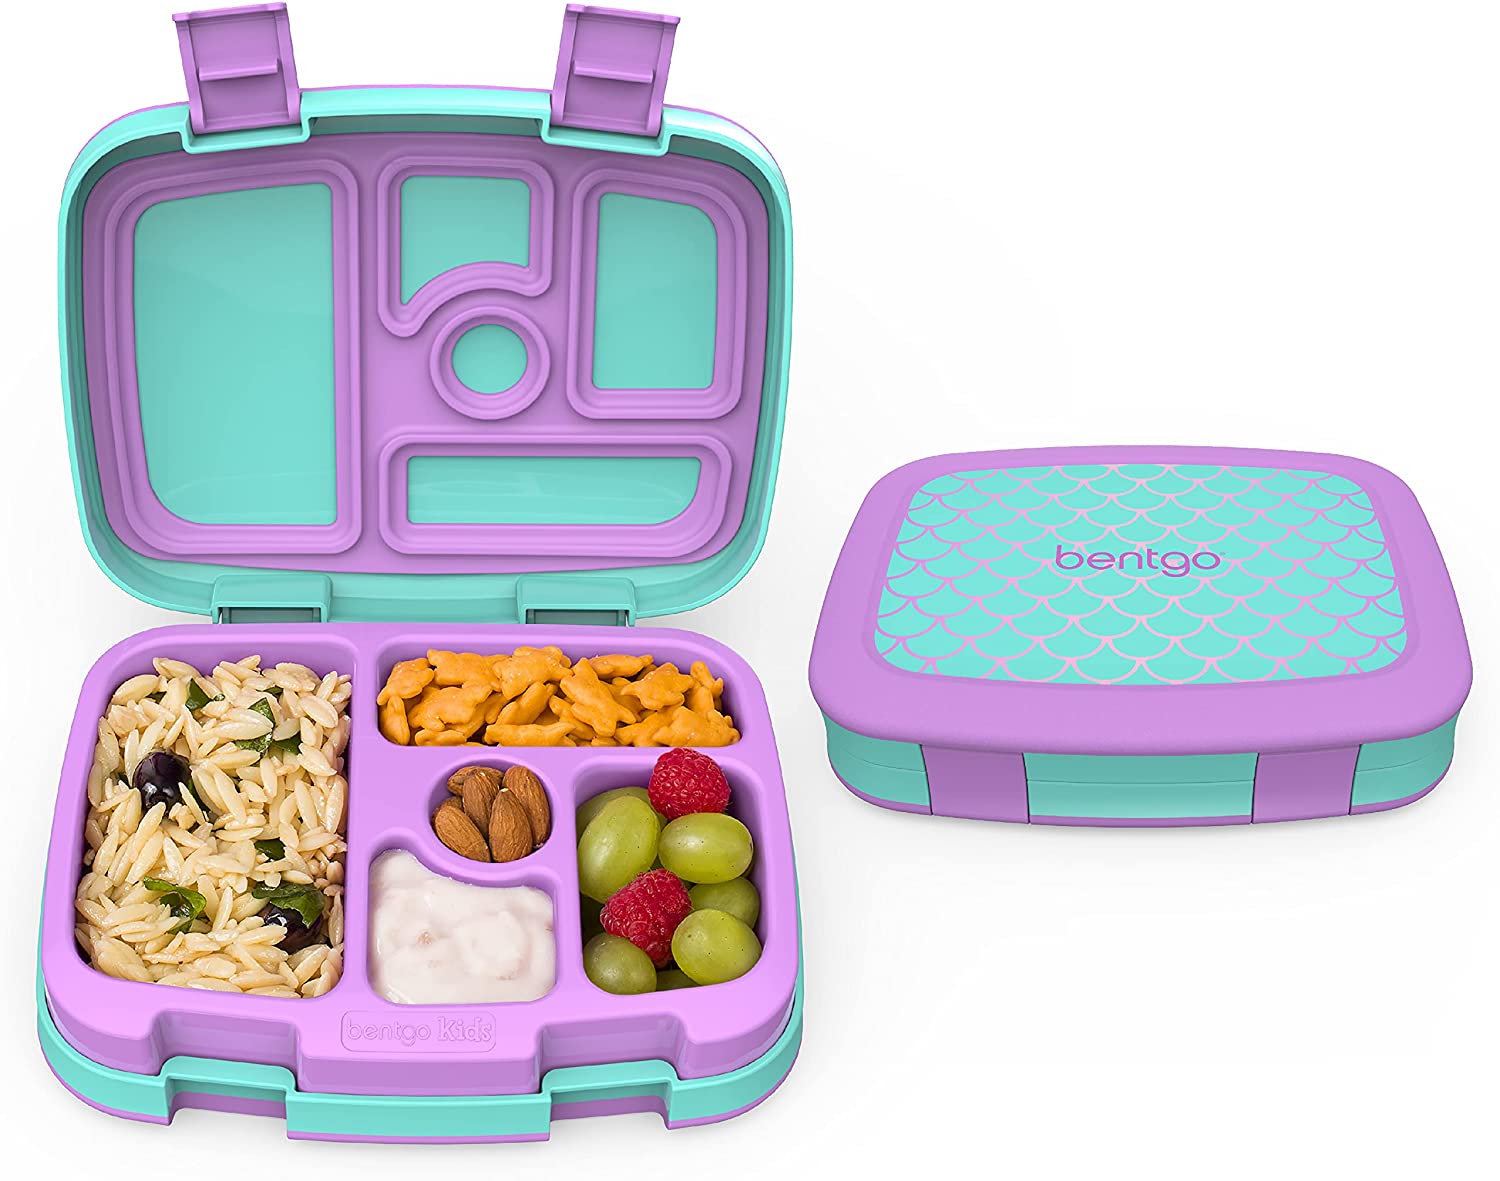 first-day-of-school-gifts-bento-box